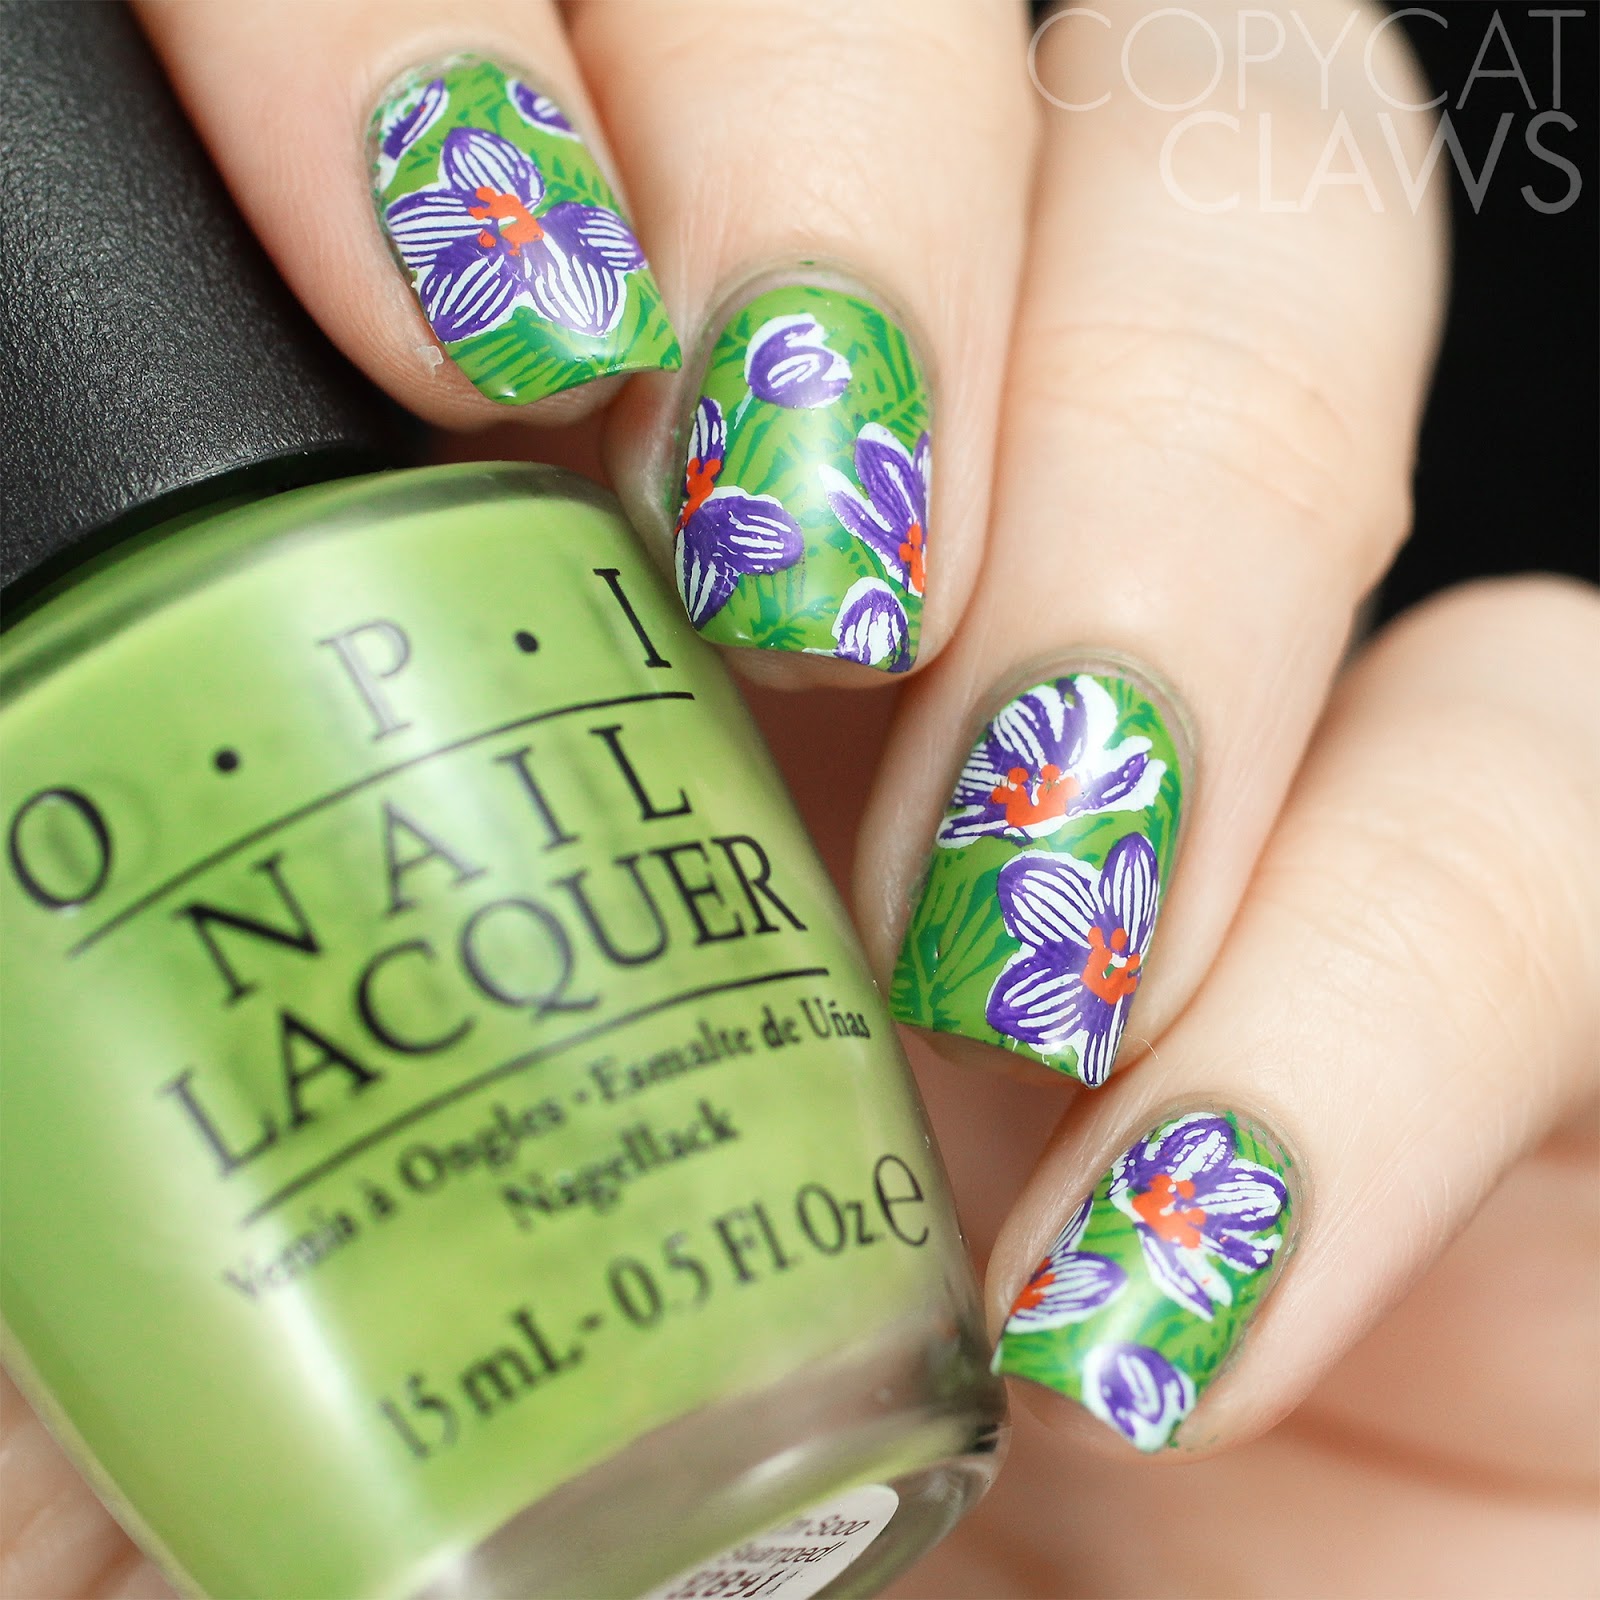 Copycat Claws: Crocus Flower Nail Stamping